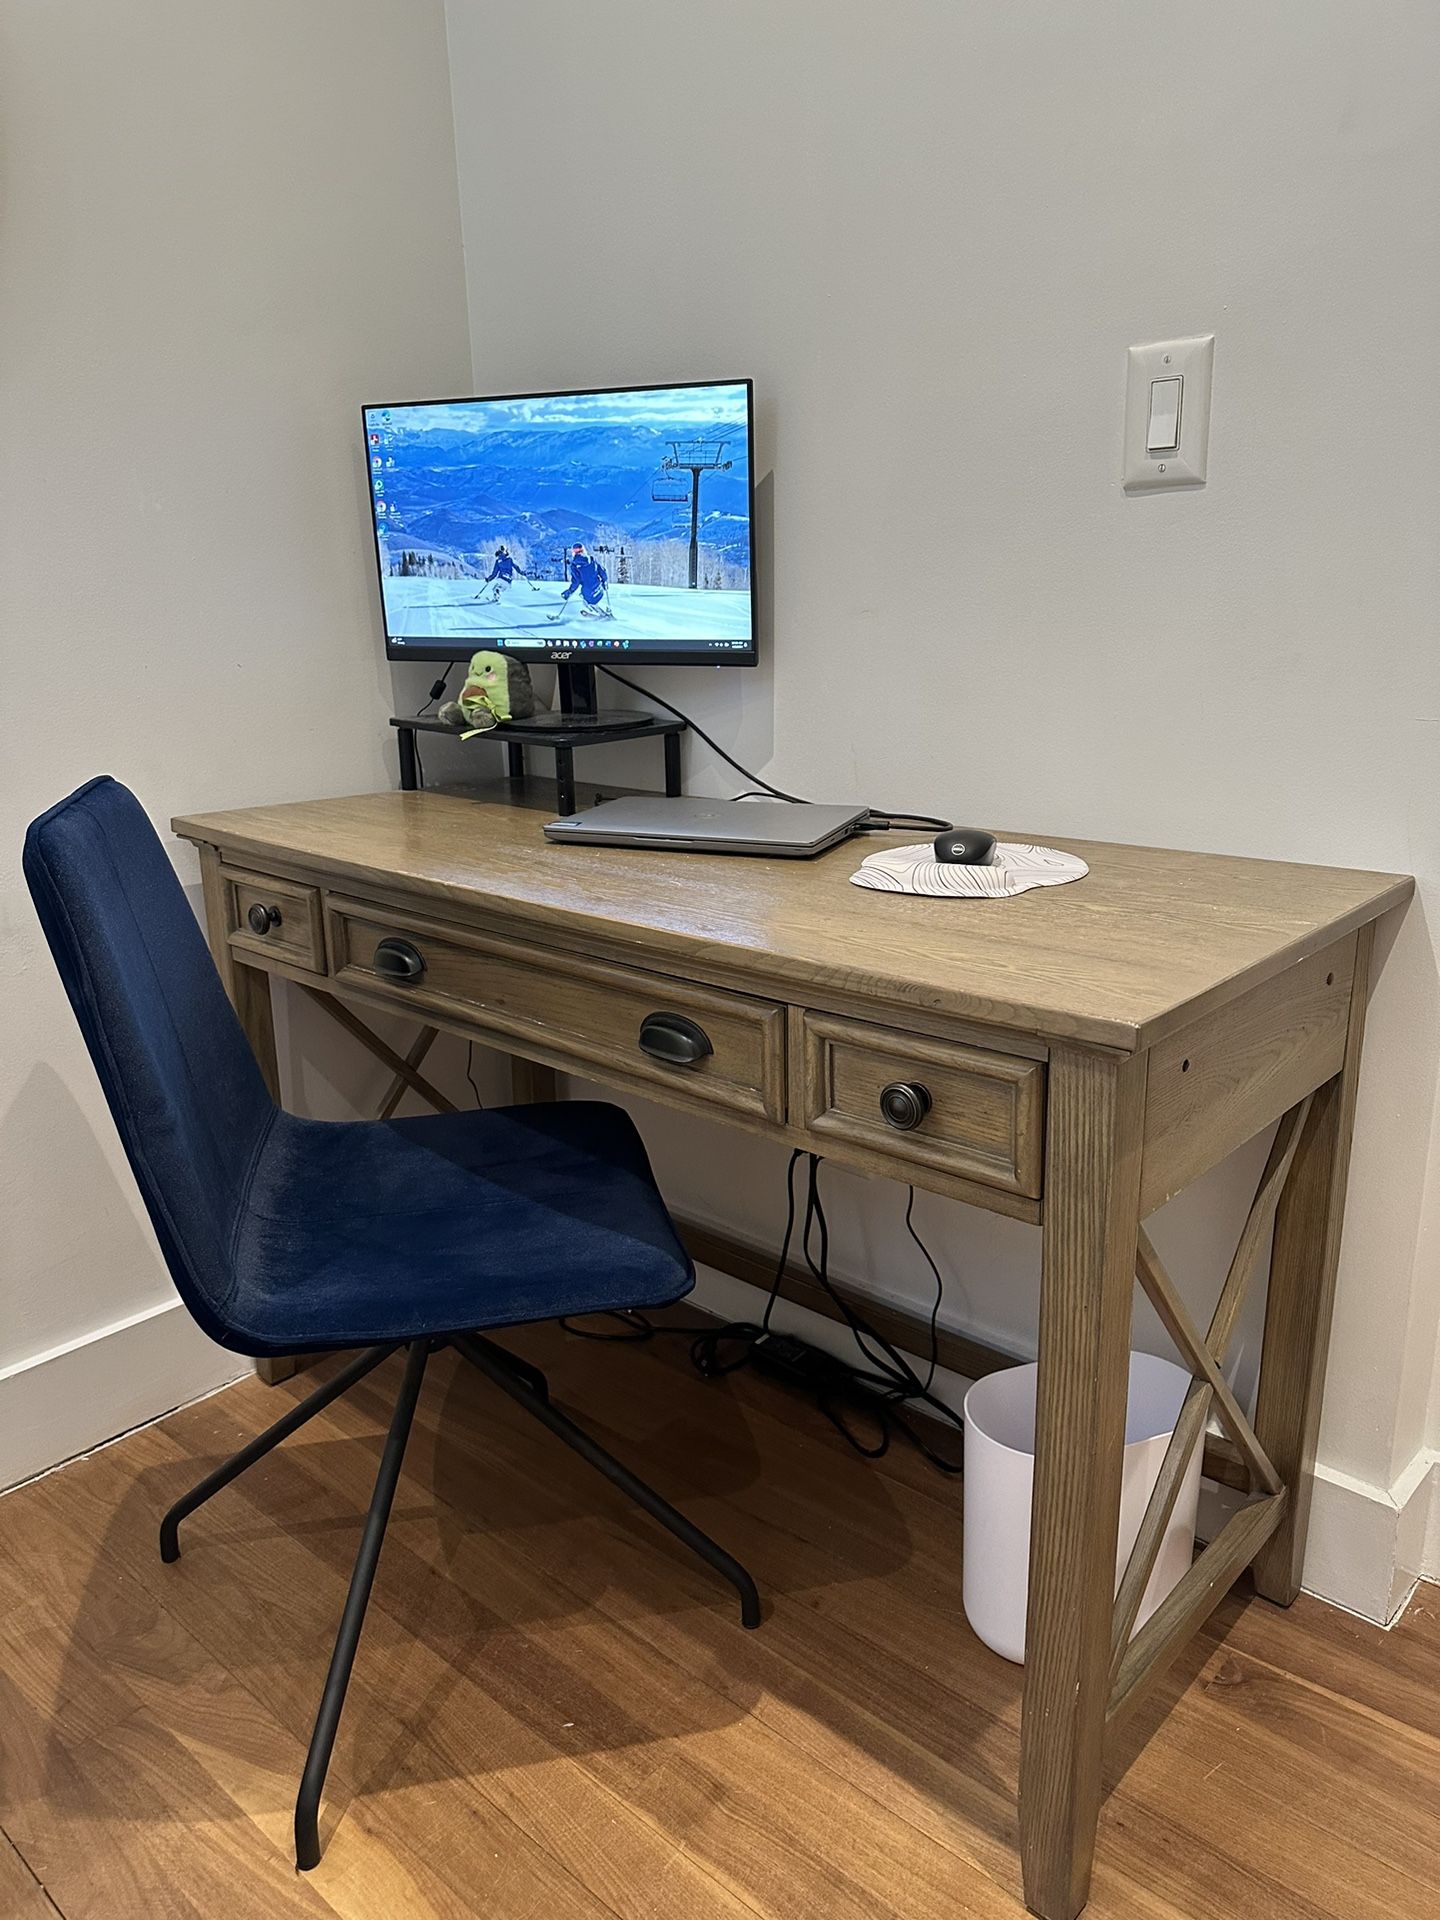 Wooden desk with drawers